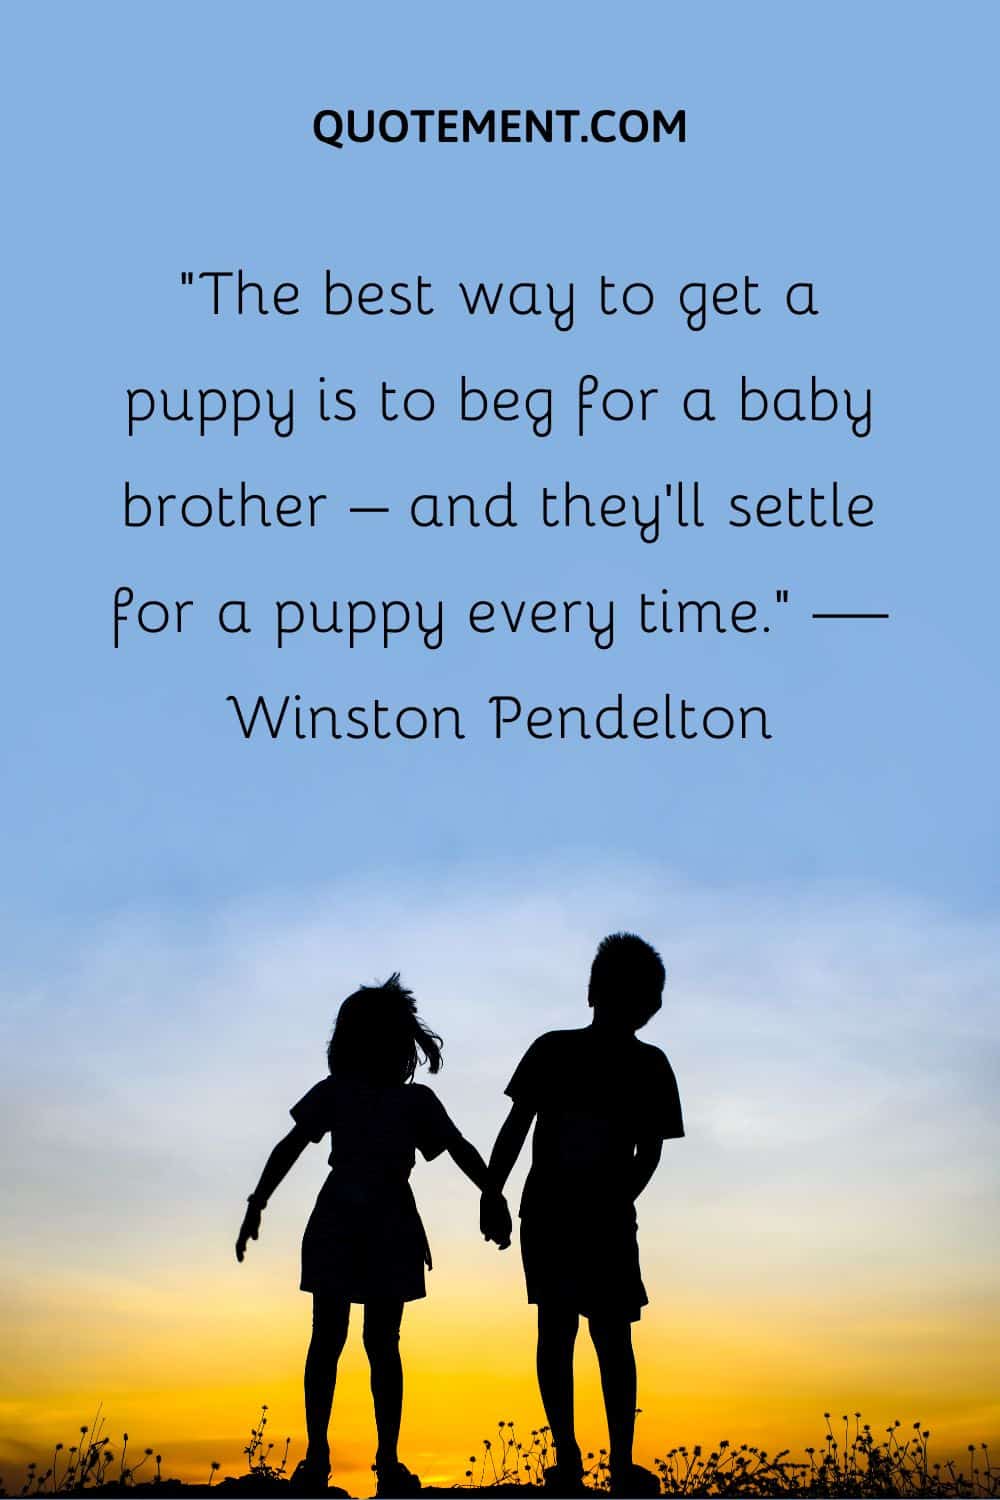 “The best way to get a puppy is to beg for a baby brother – and they’ll settle for a puppy every time.” — Winston Pendelton